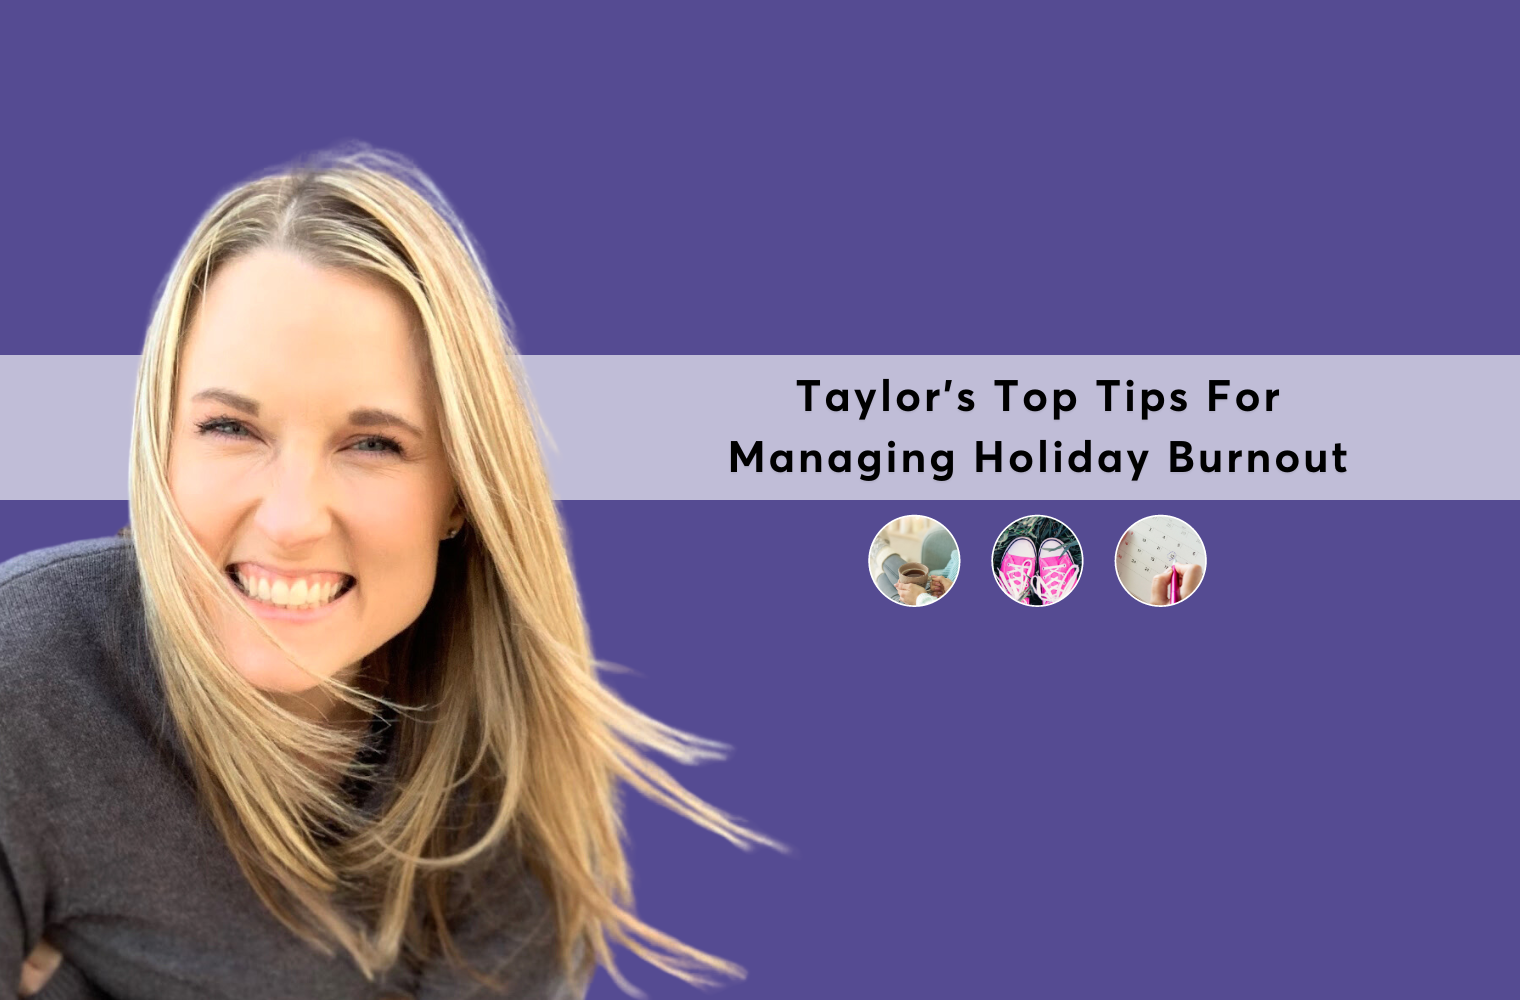 Learning How to Manage Holiday Burnout